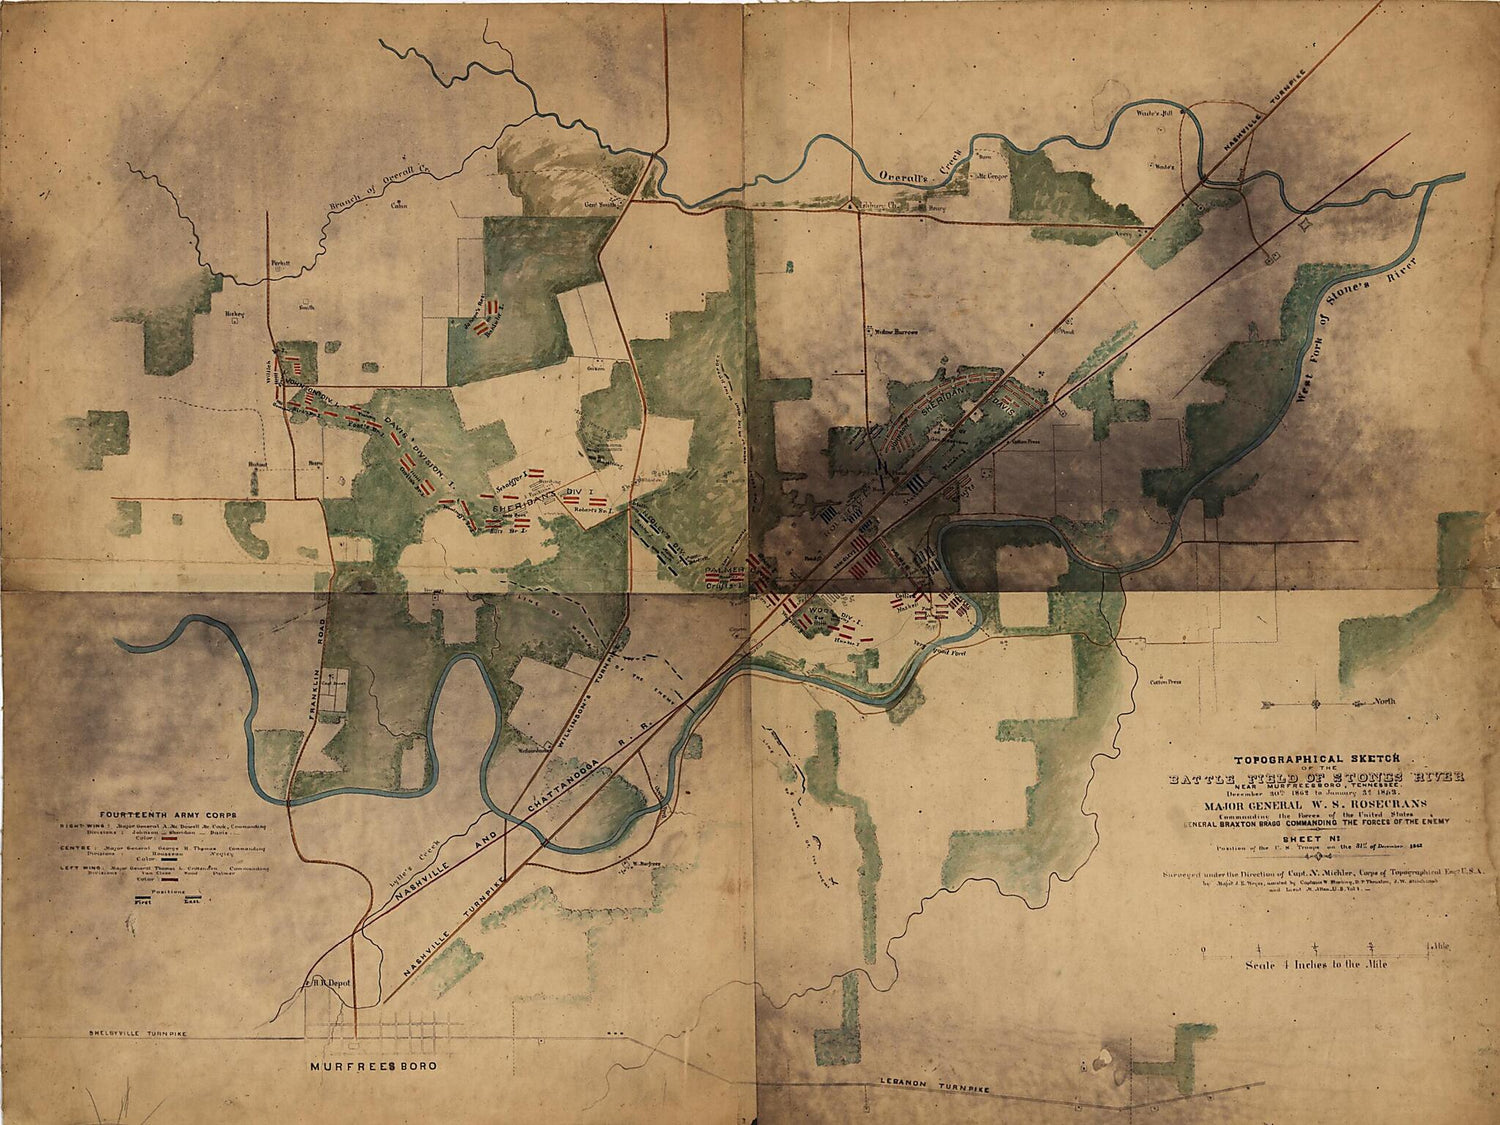 This old map of Topographical Sketch of the Battle Field of Stone River Near Murfreesboro, Tennessee, December 30th 1862 to January 3d from 1863 Position of the U.S. Troops On the 31st of December, 1862 was created by N. (Nathaniel) Michler, J. E. Weyss 